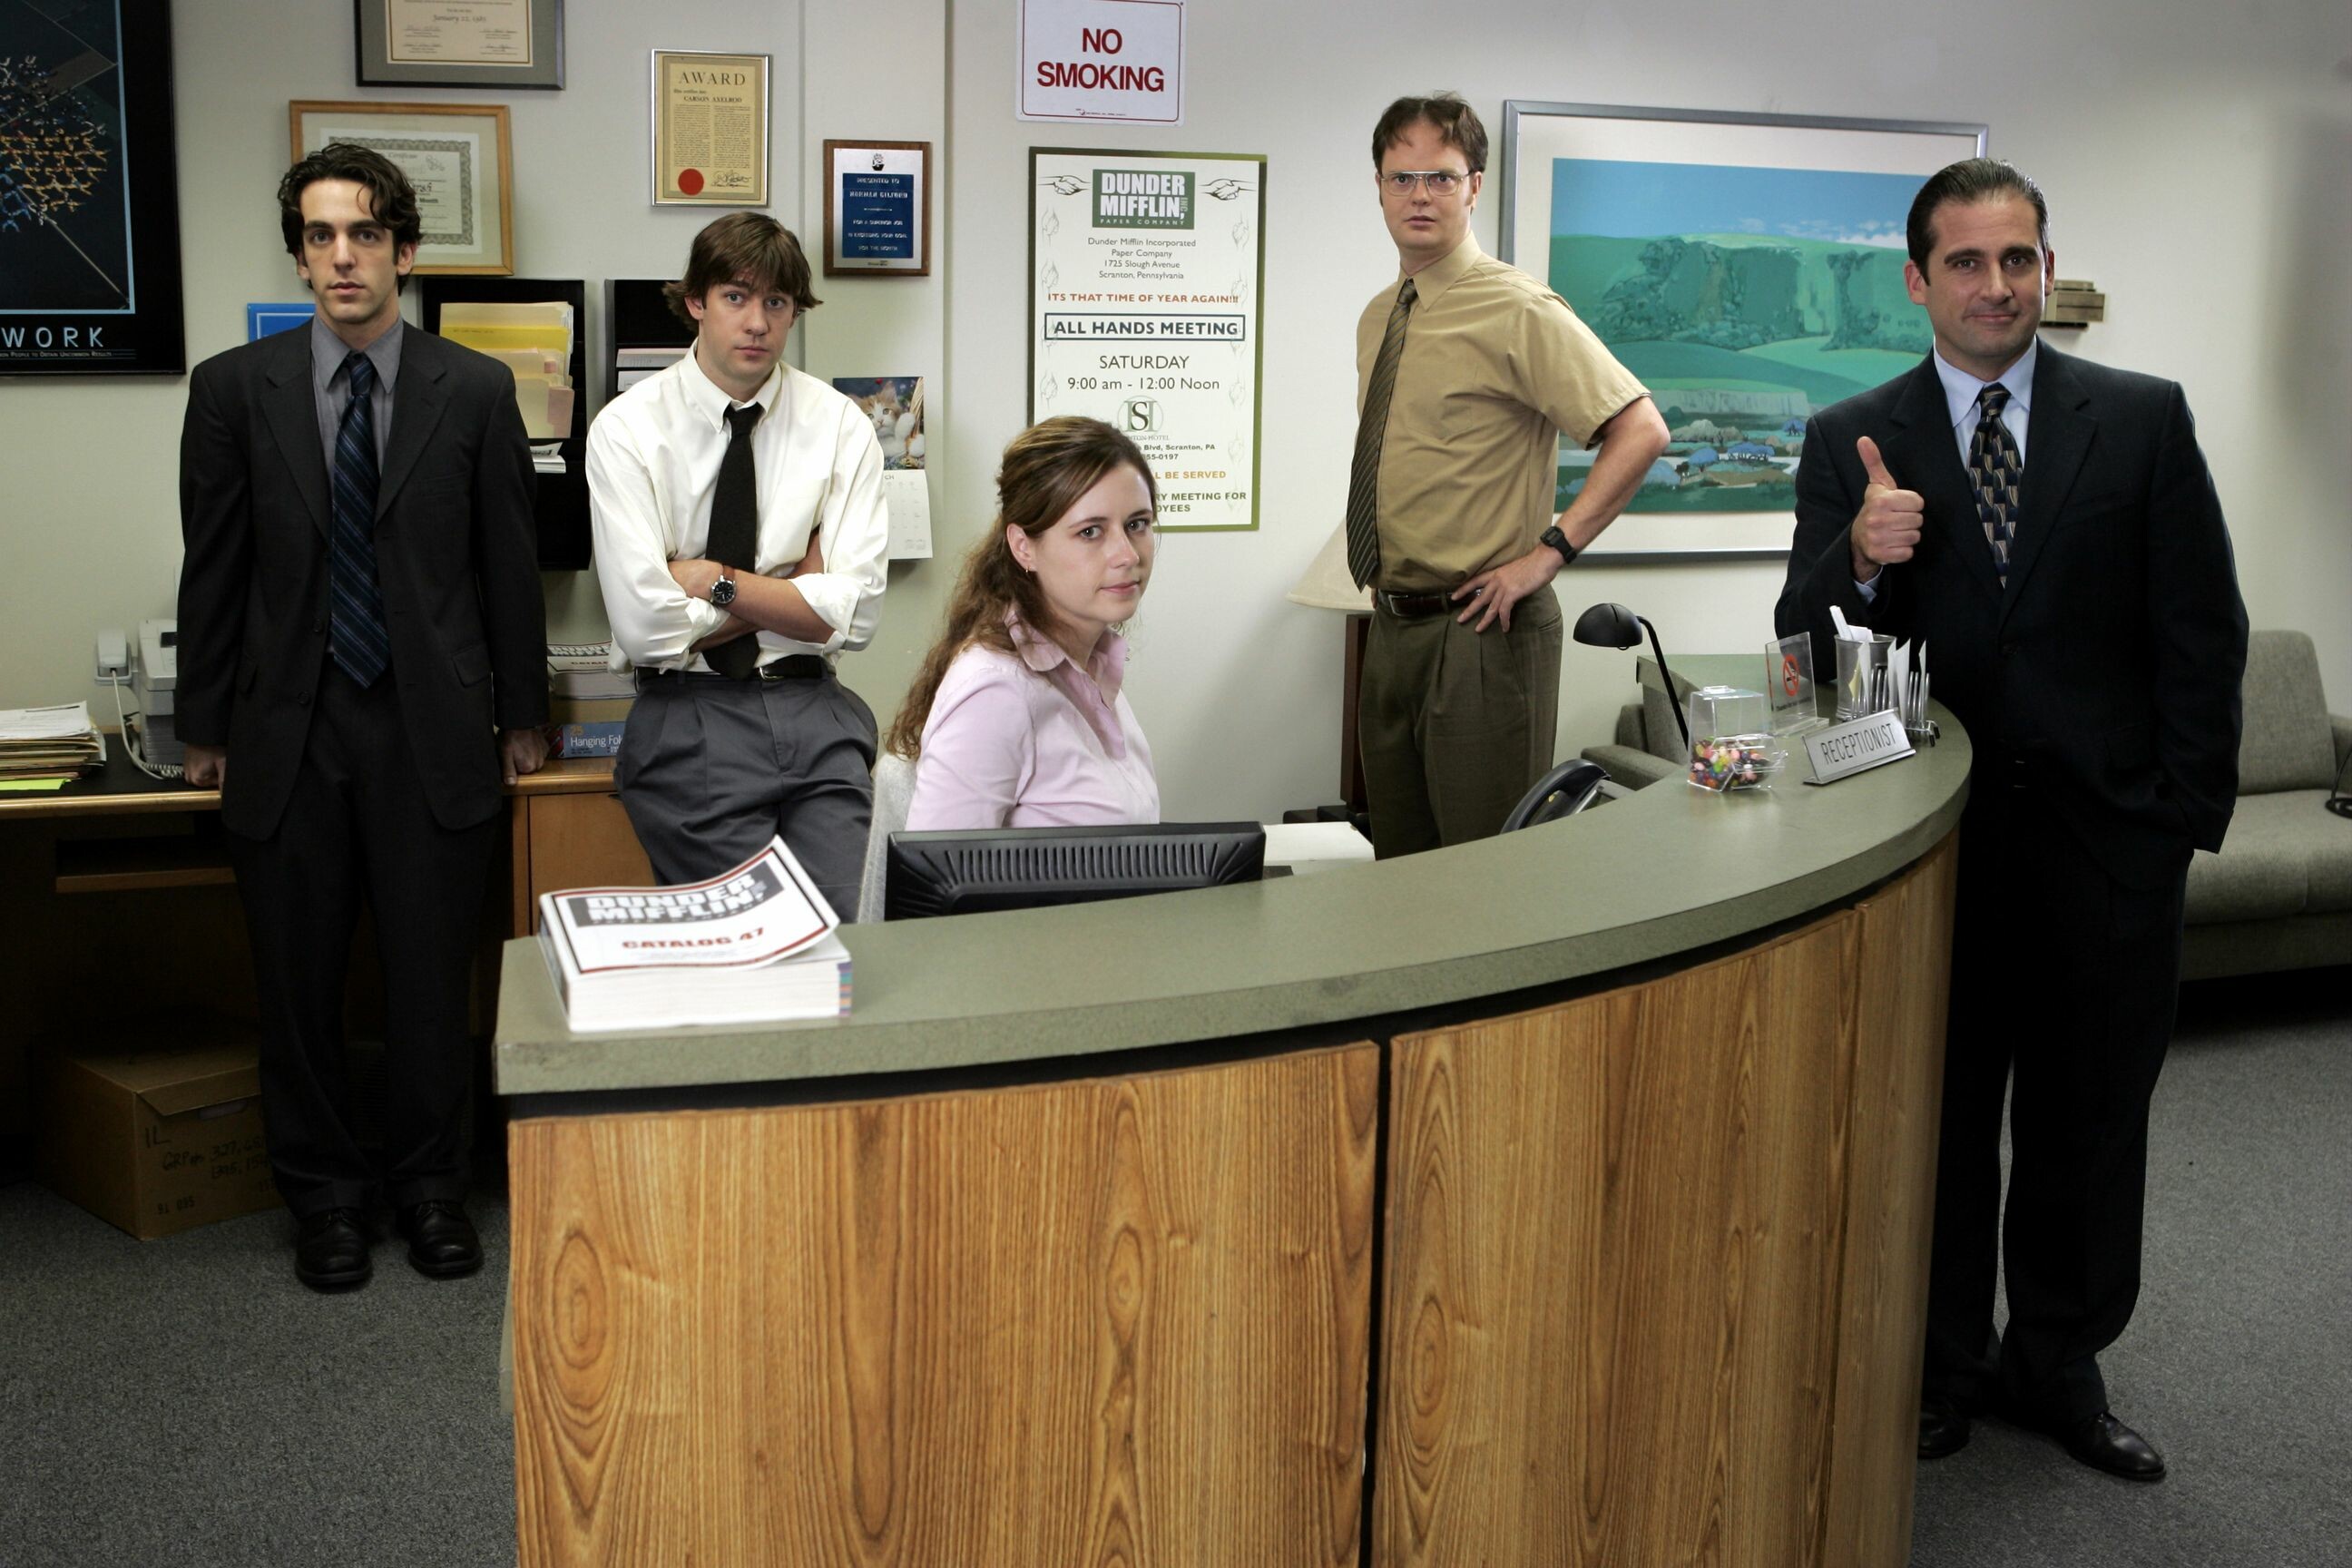 The Office (TV Series): Television show that depicts the everyday work lives of office employees at the Dunder Mifflin Paper Company. 2600x1730 HD Background.